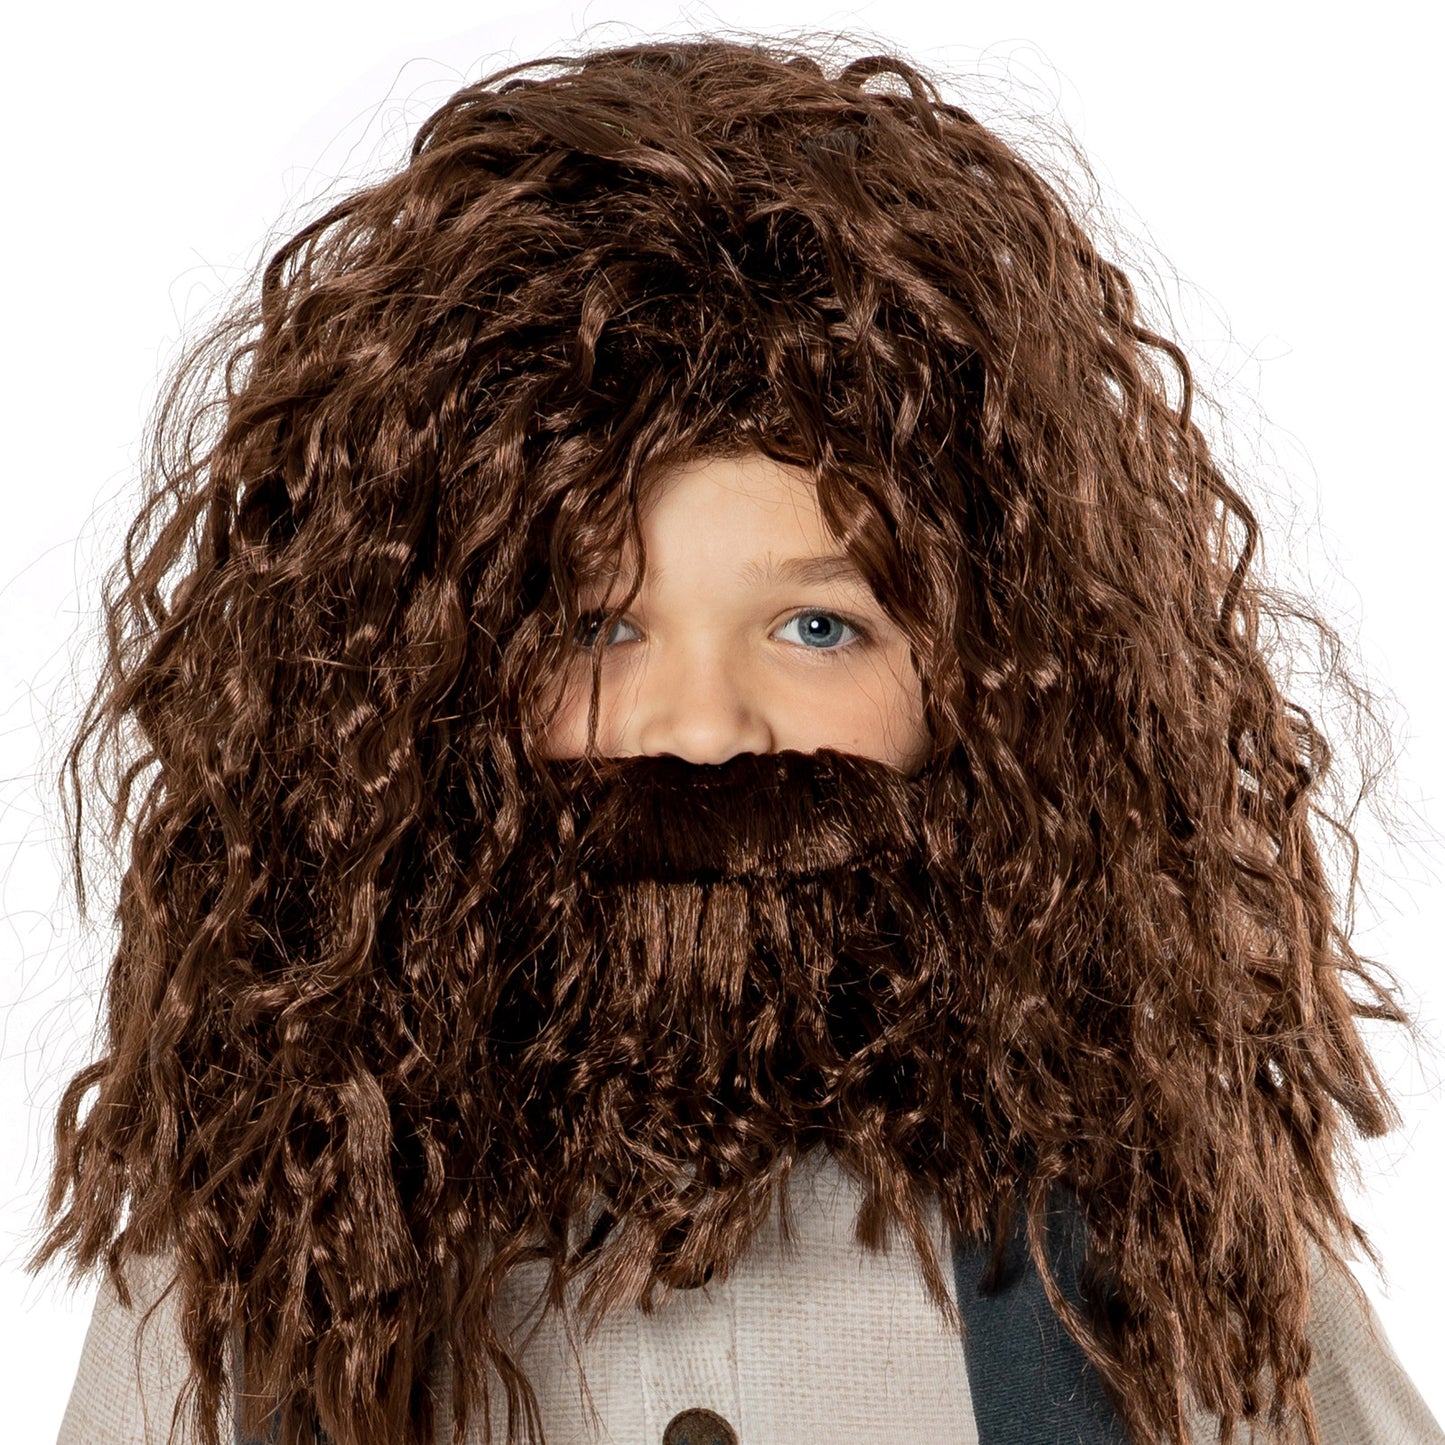 Hagrid Child Harry Potter Boys Costume Licensed with wig and beard